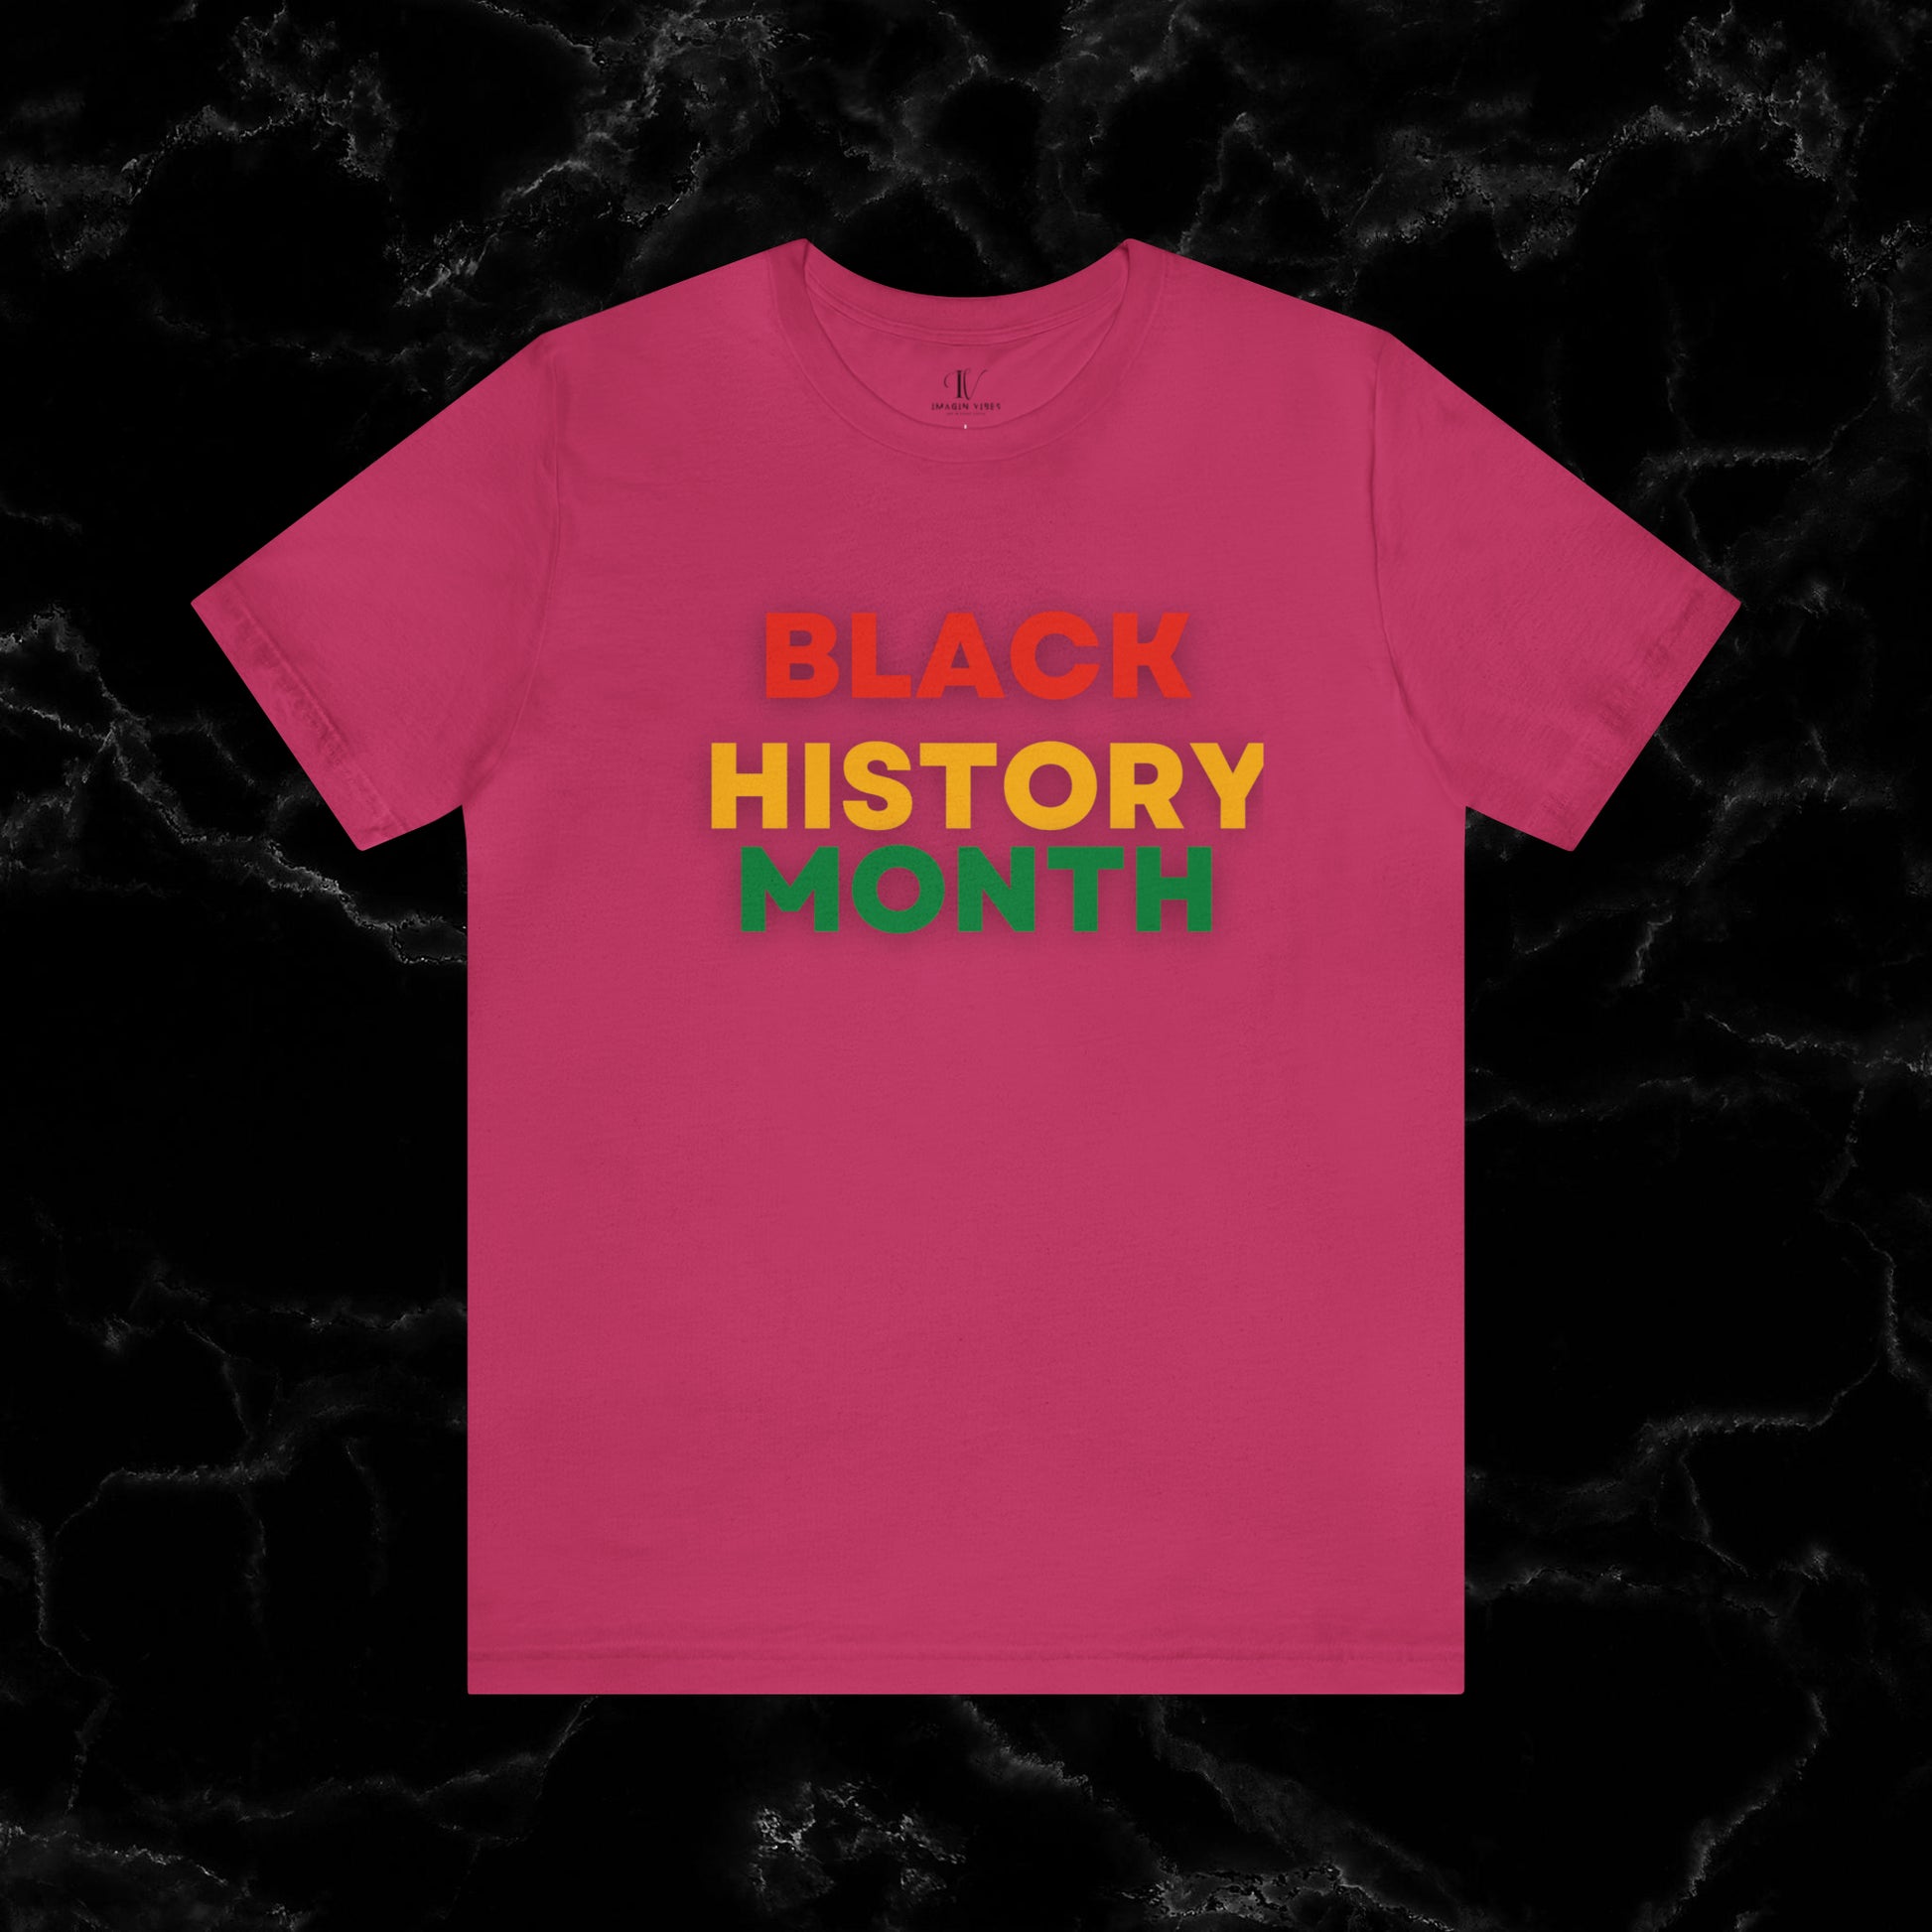 Trendy Black History Month Shirts Celebrating African American Pride and Heritage T-Shirt Berry XS 